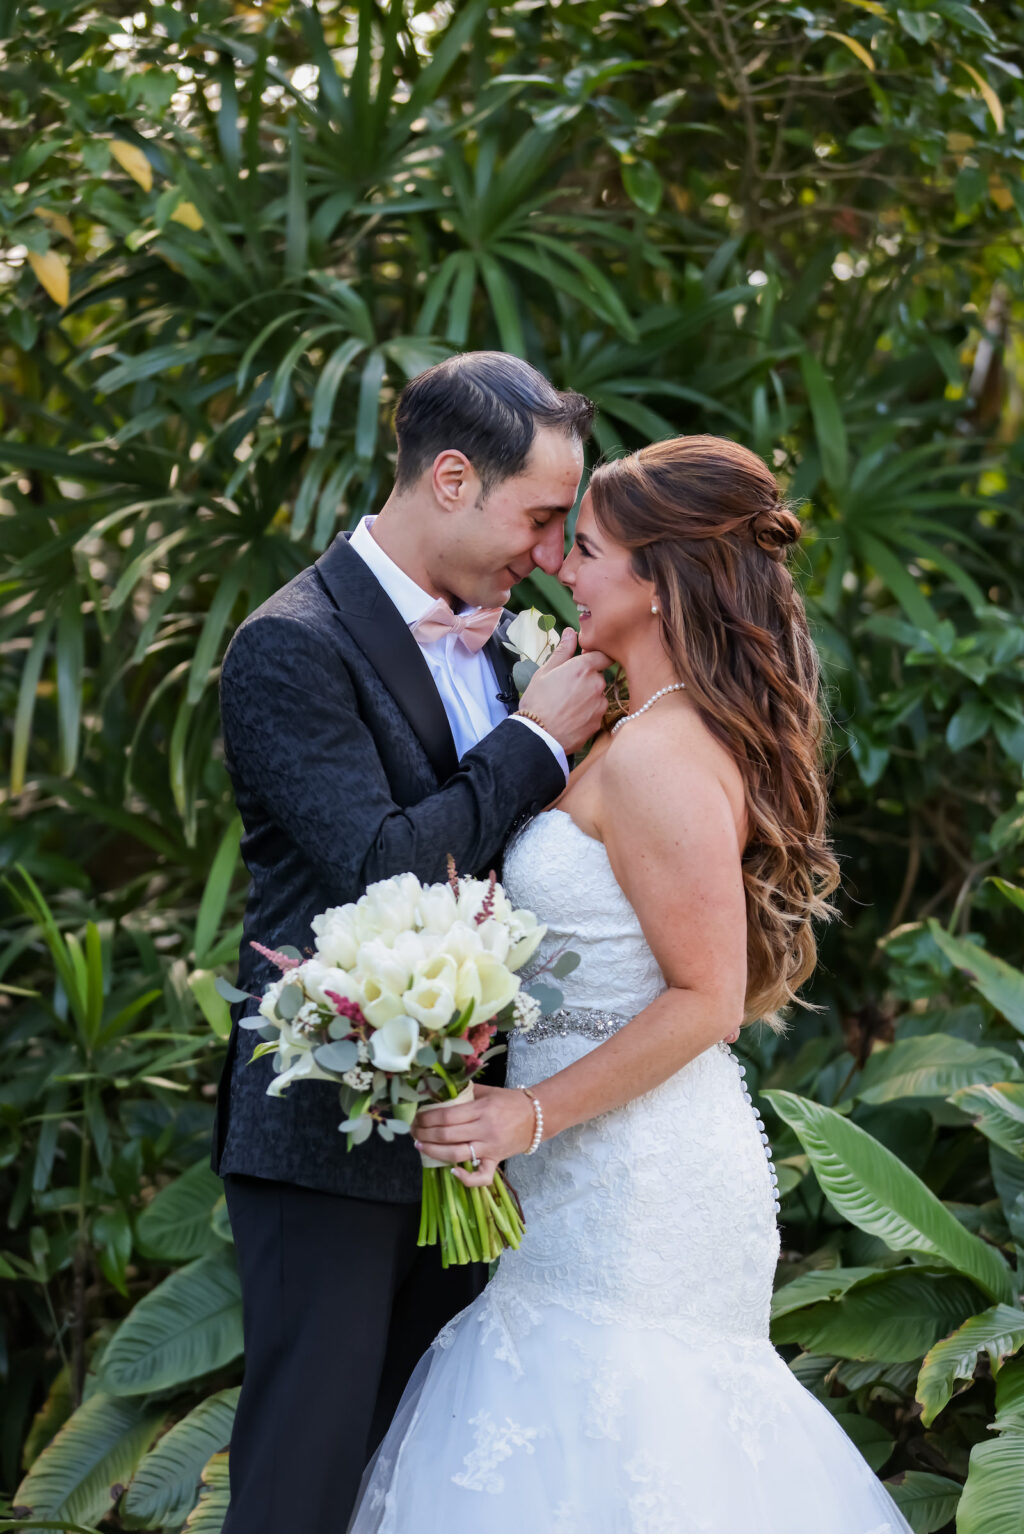 Romantic Classic Bride Holding White Roses and Eucalyptus Floral Bouquet, First Look with Groom in Garden | Tampa Bay Wedding Photographer Lifelong Photography Studio | Wedding Hair and Makeup Michele Renee the Studio | Wedding Dress Truly Forever Bridal